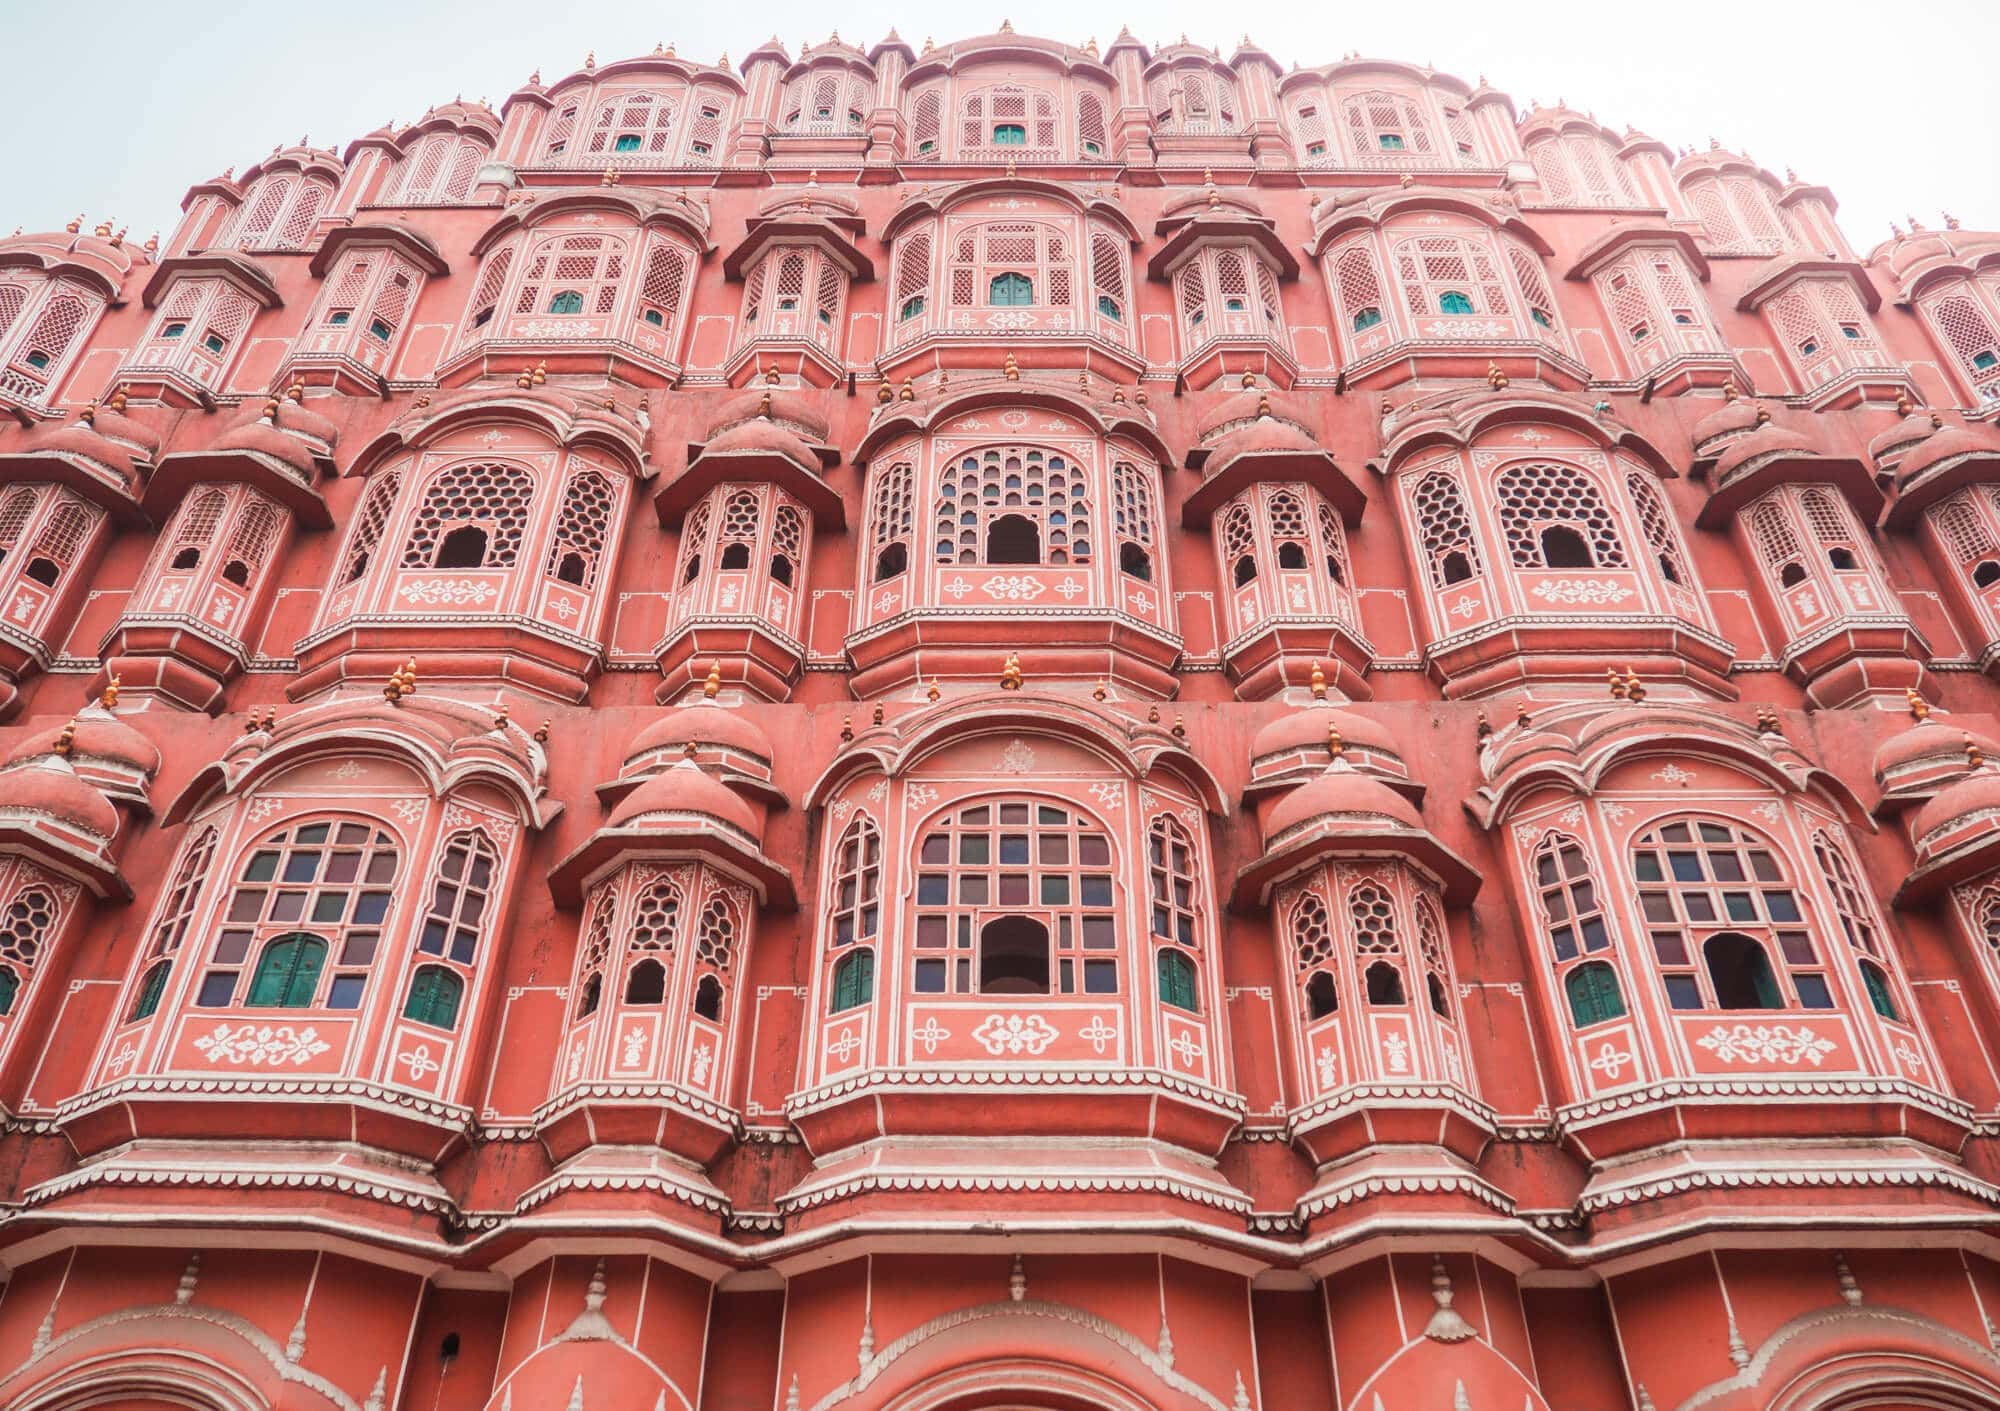 How to spend 2 days in Jaipur: Top 12 attractions | Sunshine Seeker